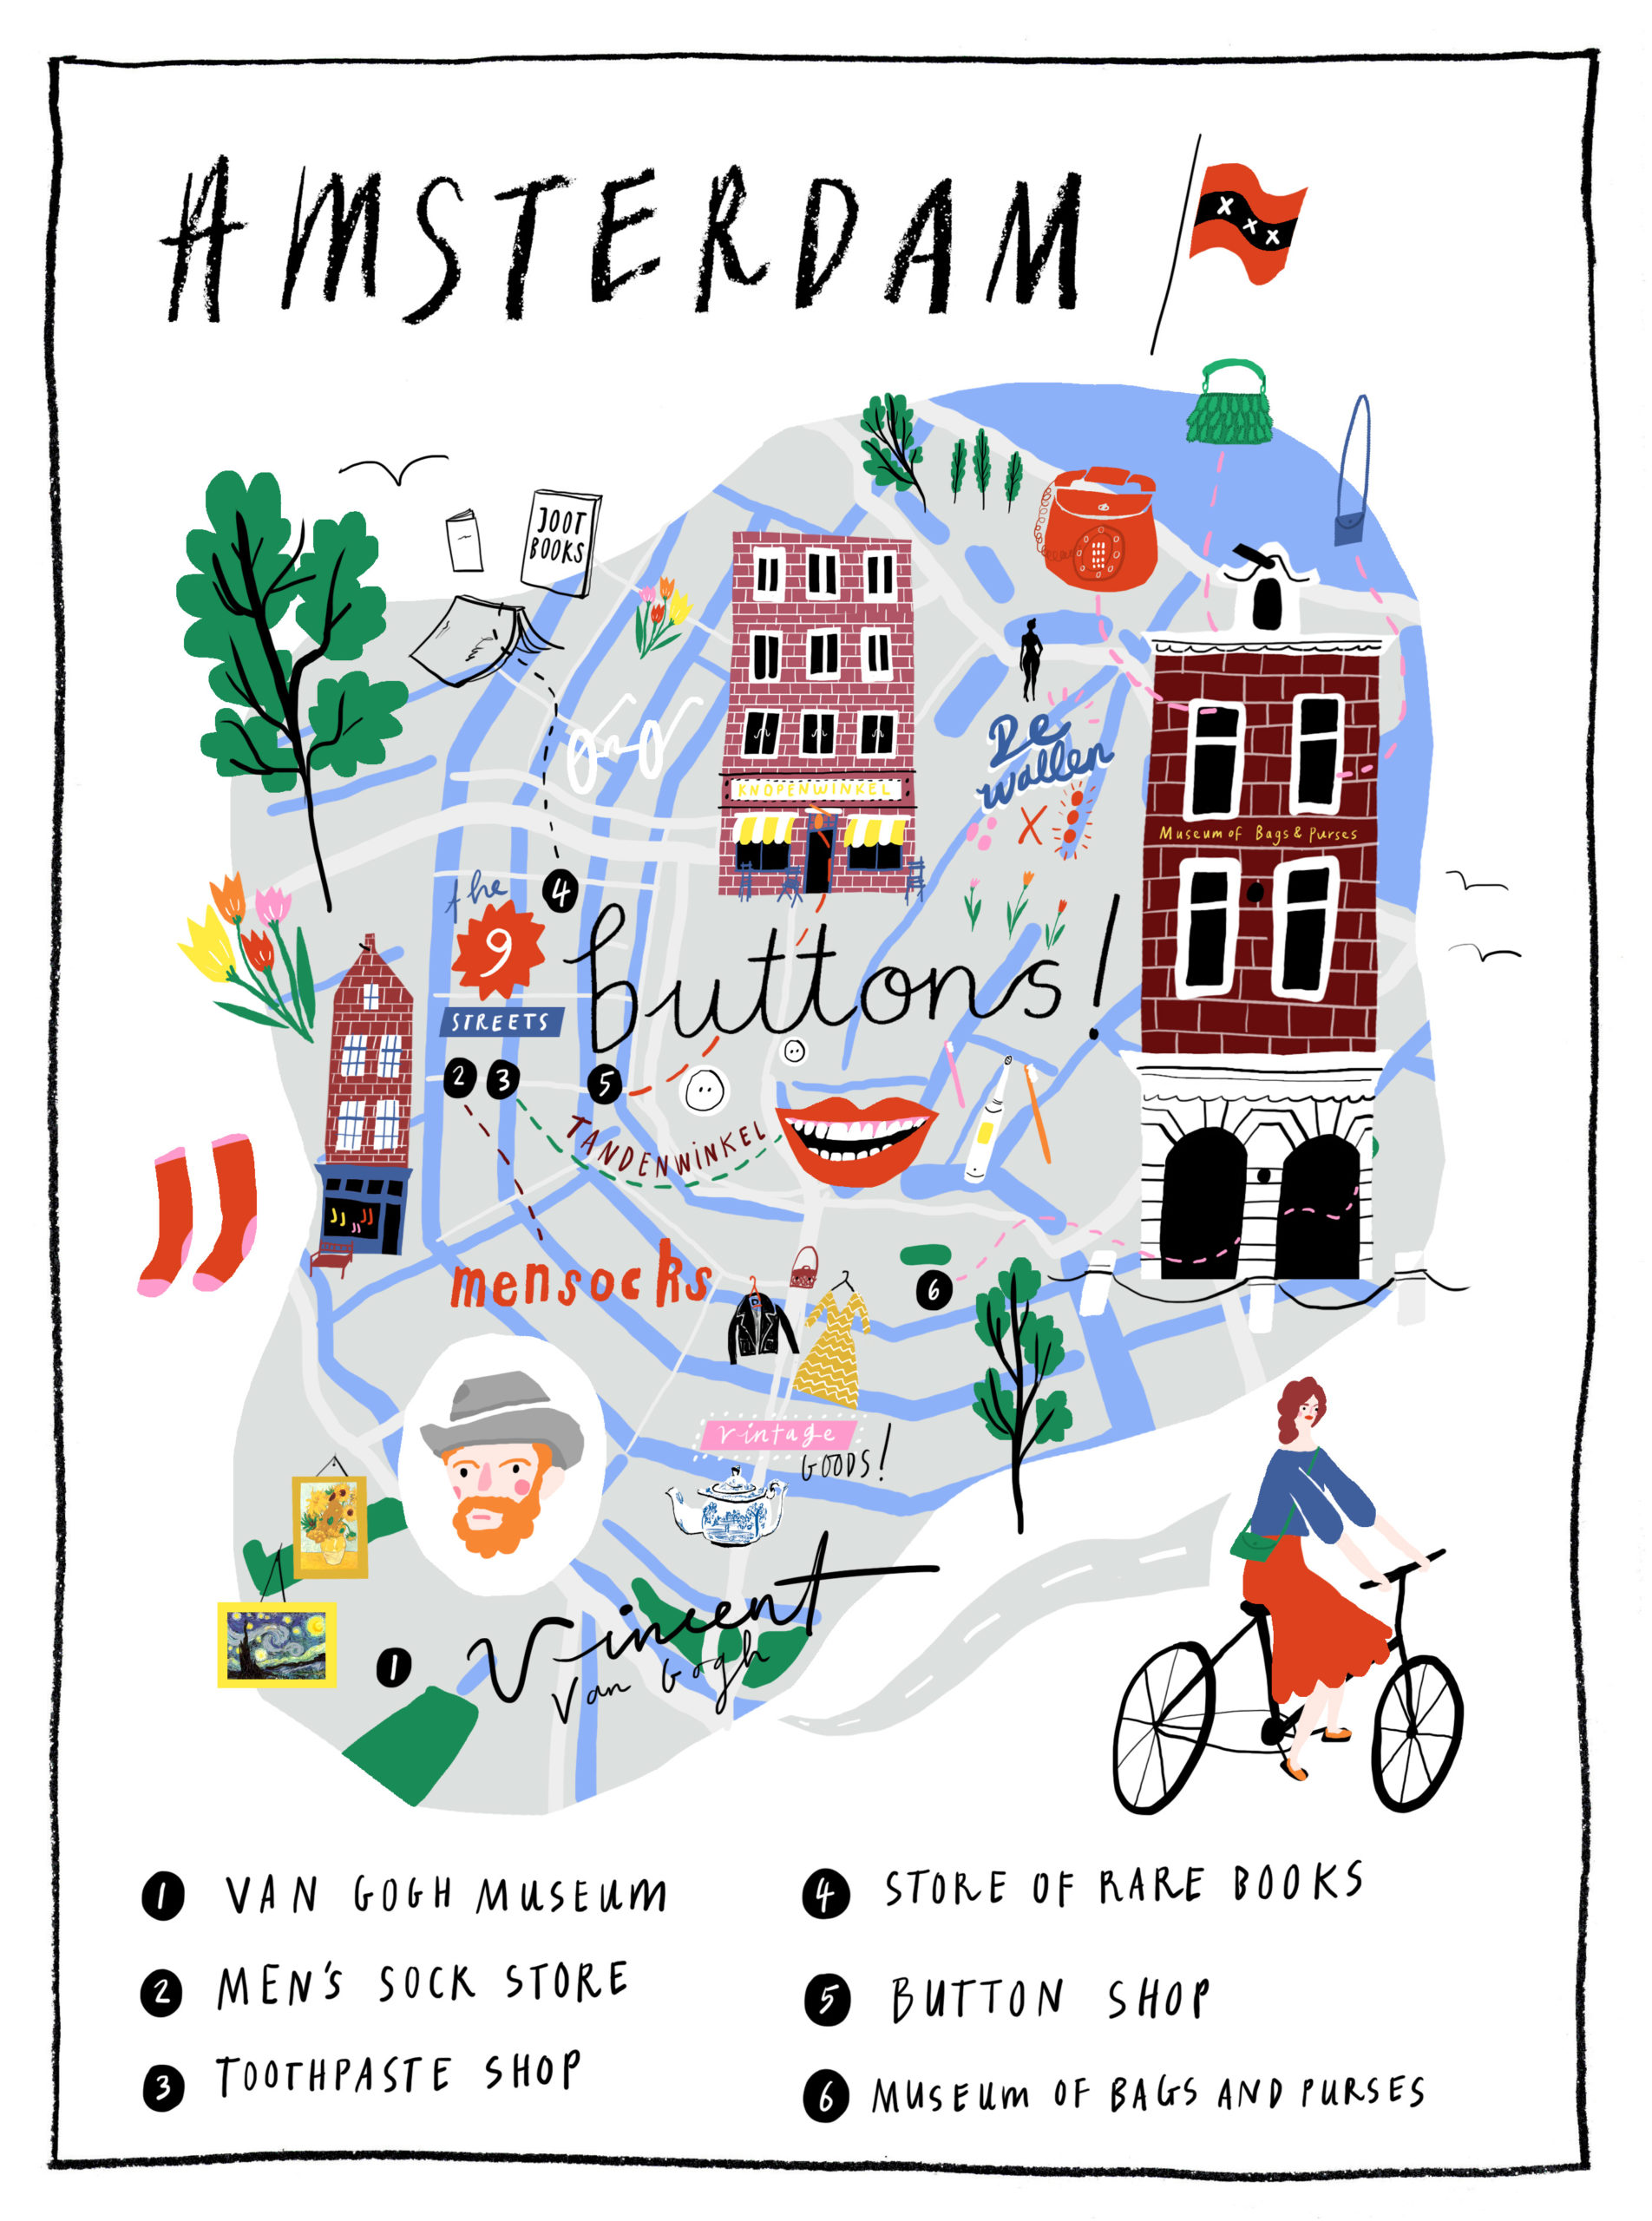 Nina Cosford Illustration - amsterdam map marie claire